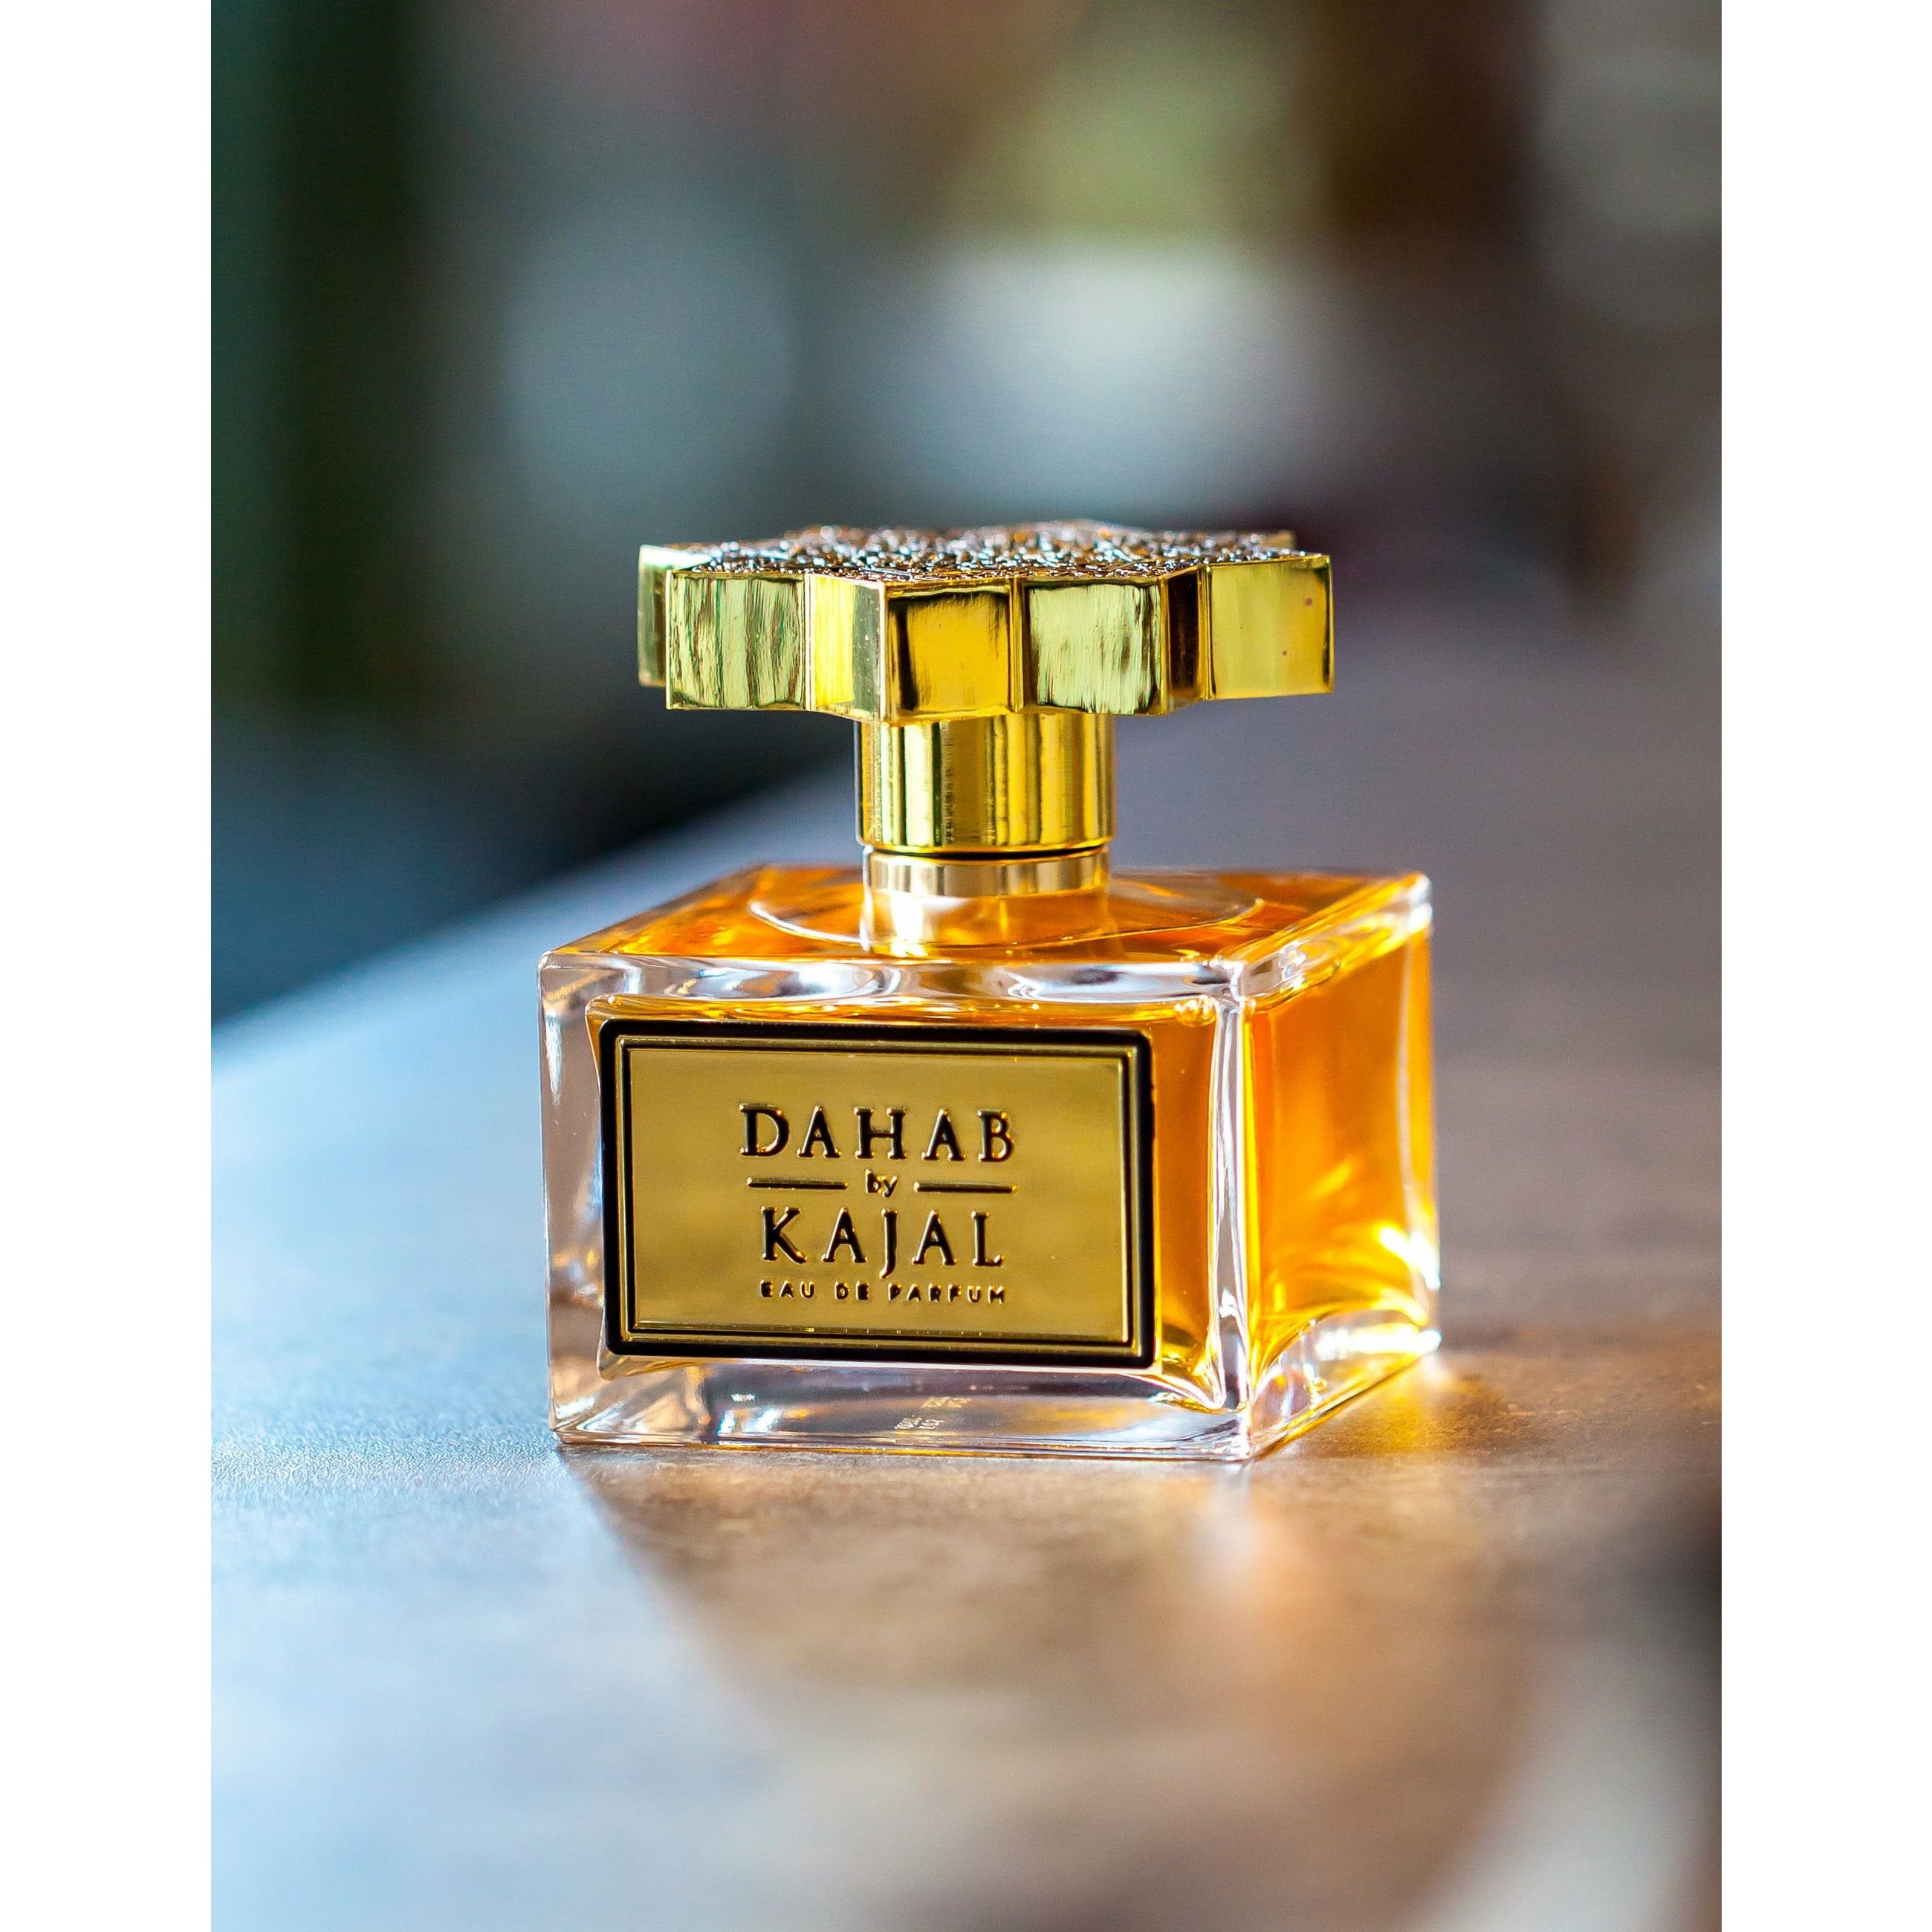 Clear glass cube bottle of Dahab 100ml with gold label and ornately engraved golden lid by Kajal perfumes.